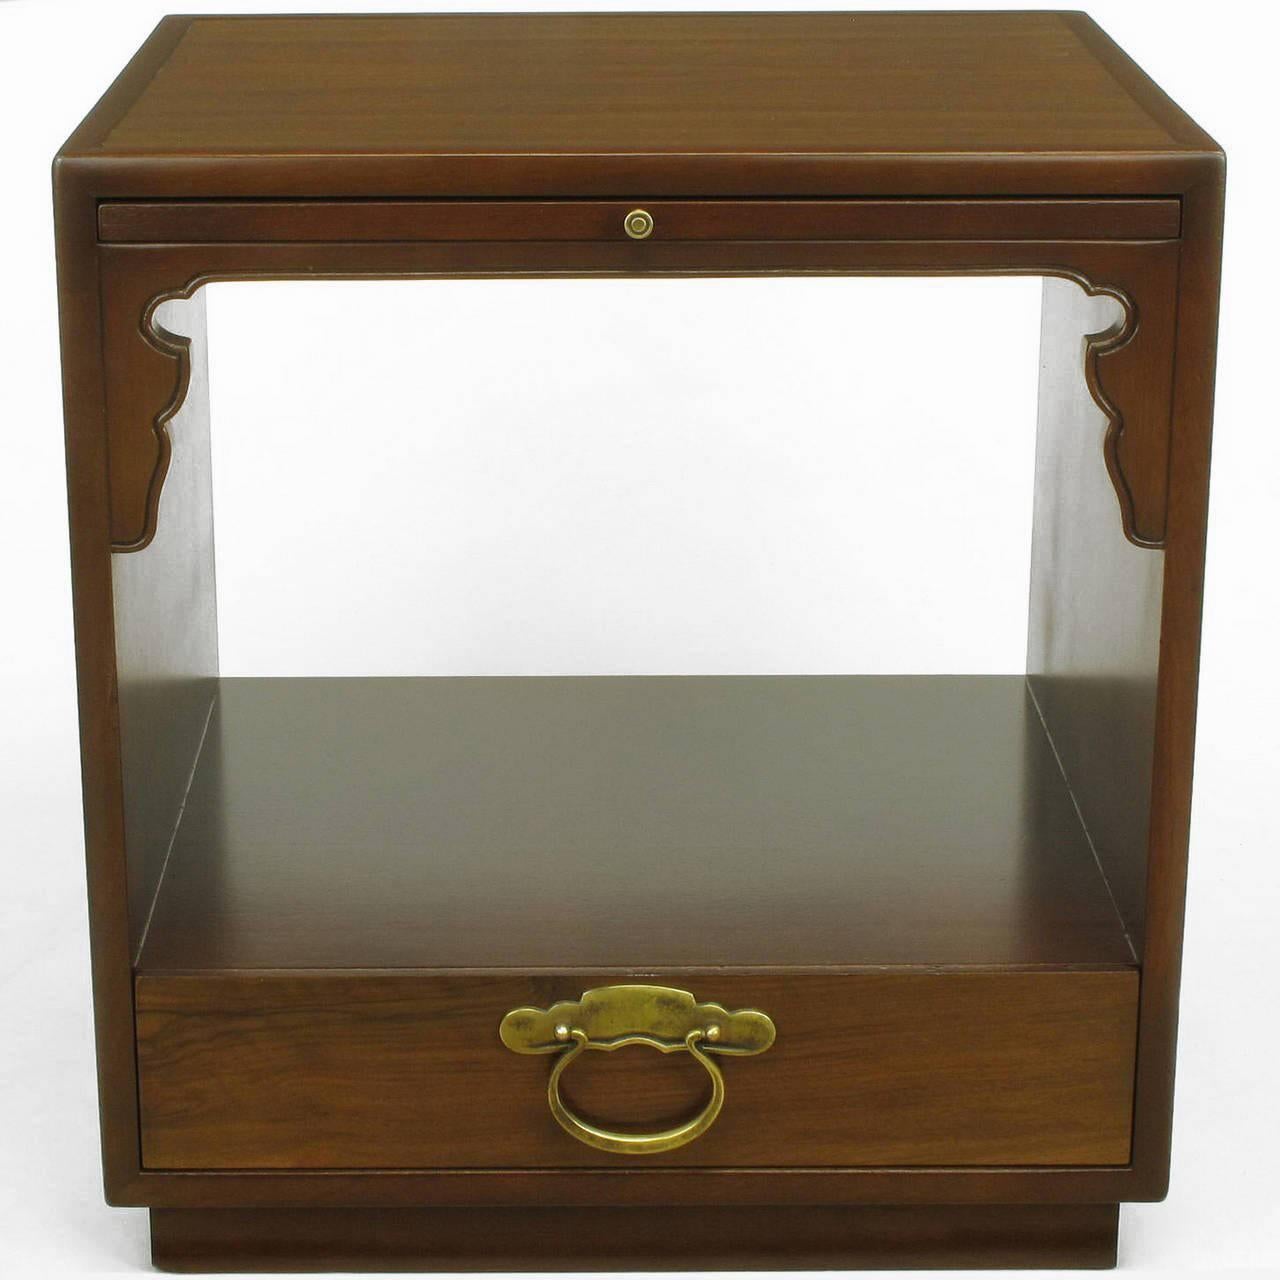 Pair of Bert England for Widdicomb nightstands with single drawer, pull-out righting surface and open shelf. Constructed of solid mahogany edging and East Indian Laurel wood veneer with large drop pull to the drawer and button sized pull for writing